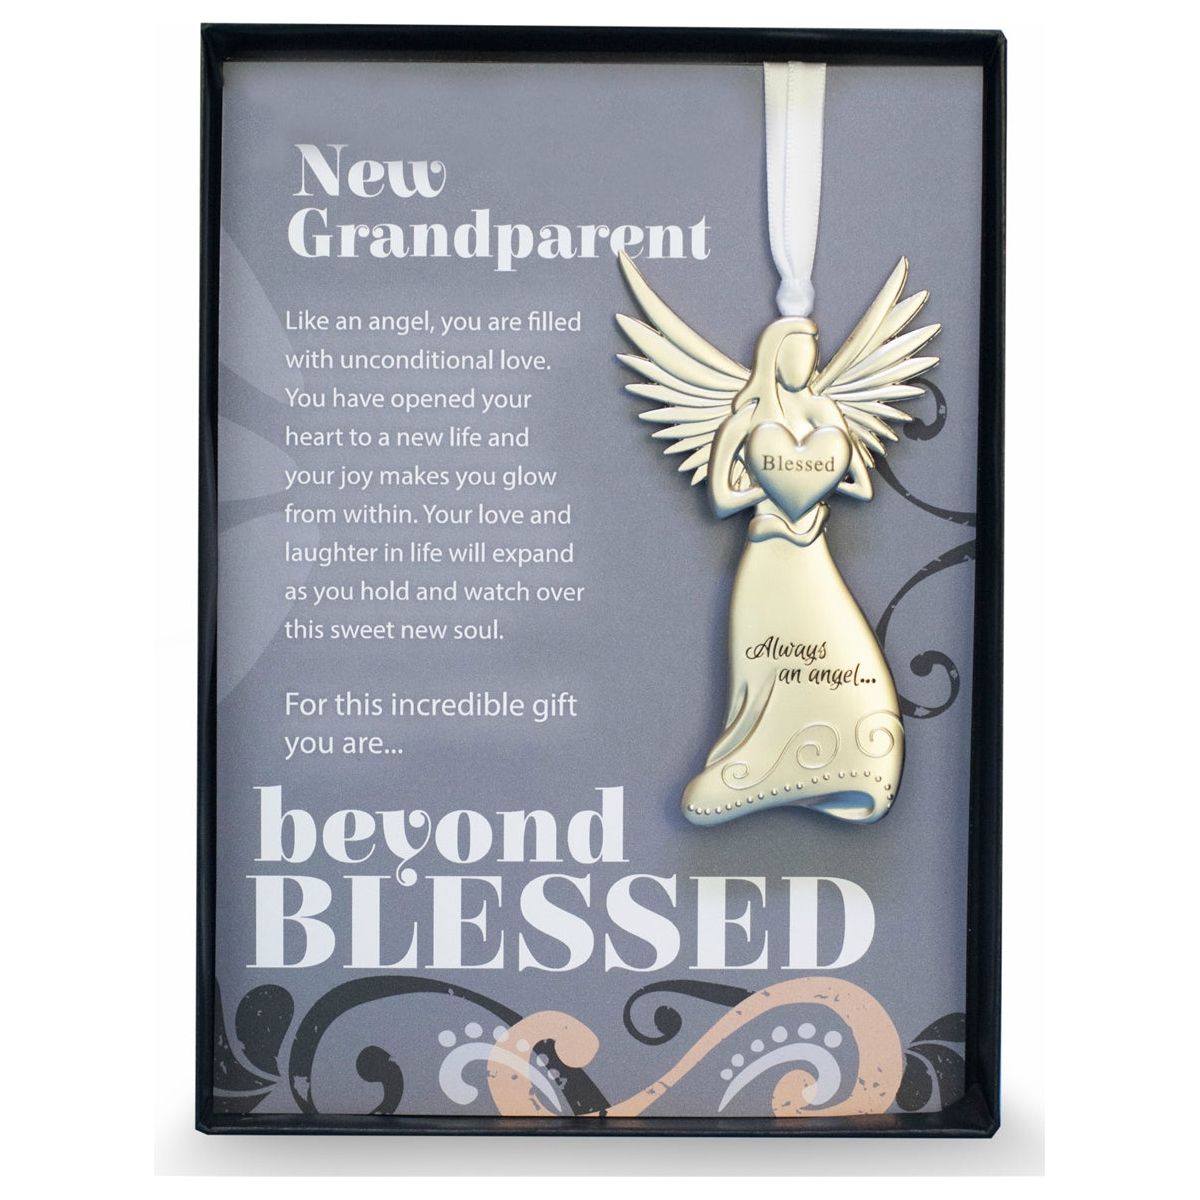 Gift for New Grandparent- 4" metal blessed angel ornament with "New Grandparent" Beyond Blessed sentiment in black gift box with clear lid.